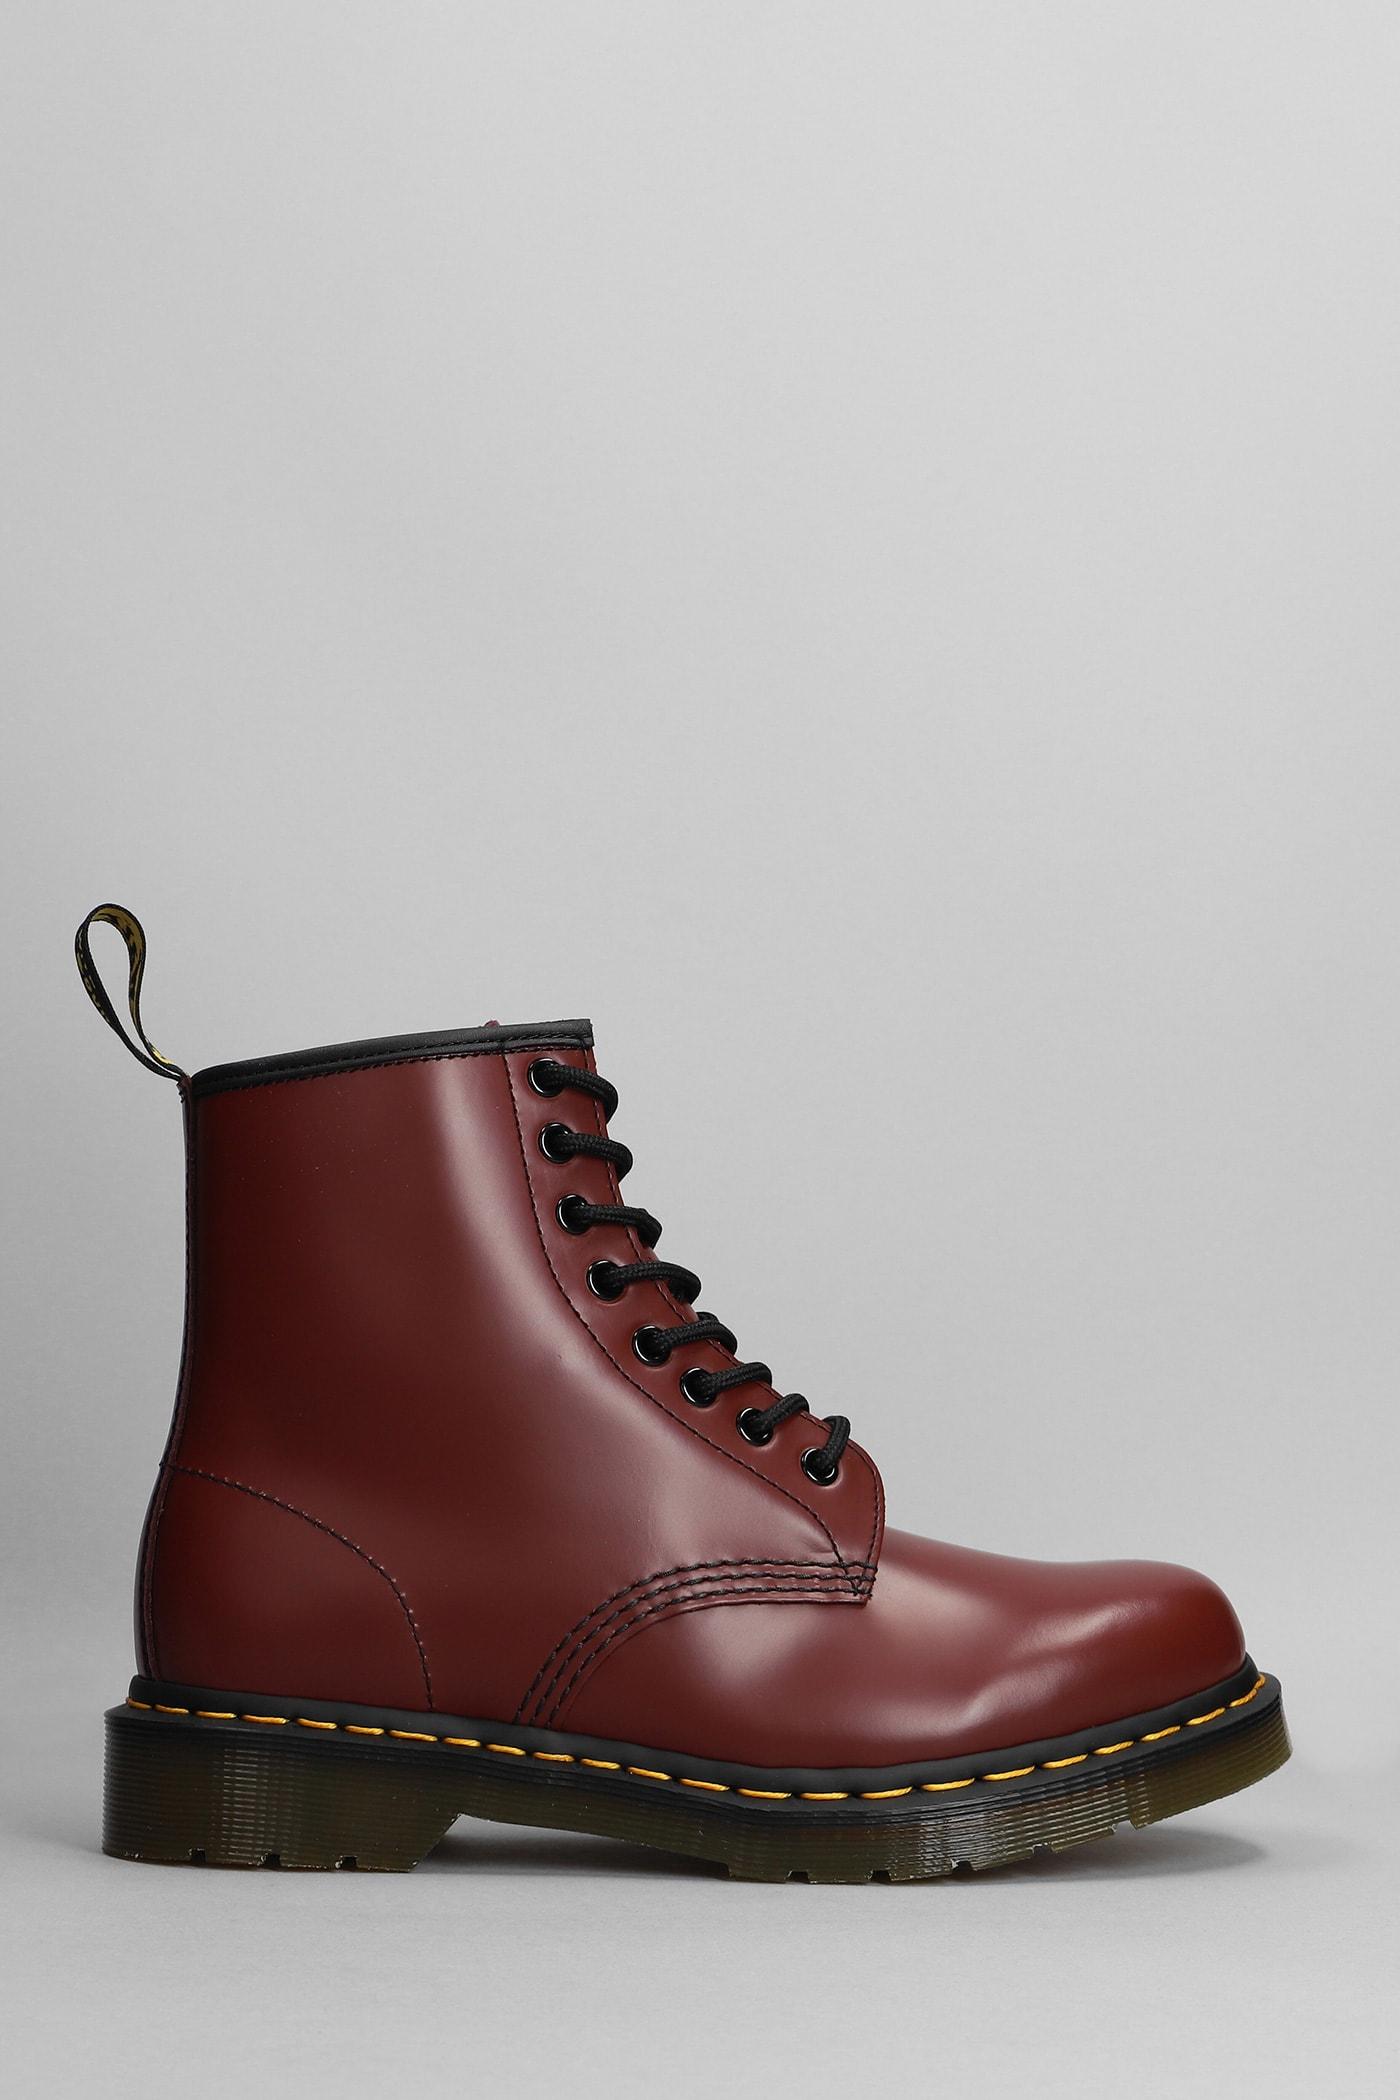 Dr. Martens 1460 Combat Boots In Bordeaux Leather in Brown | Lyst